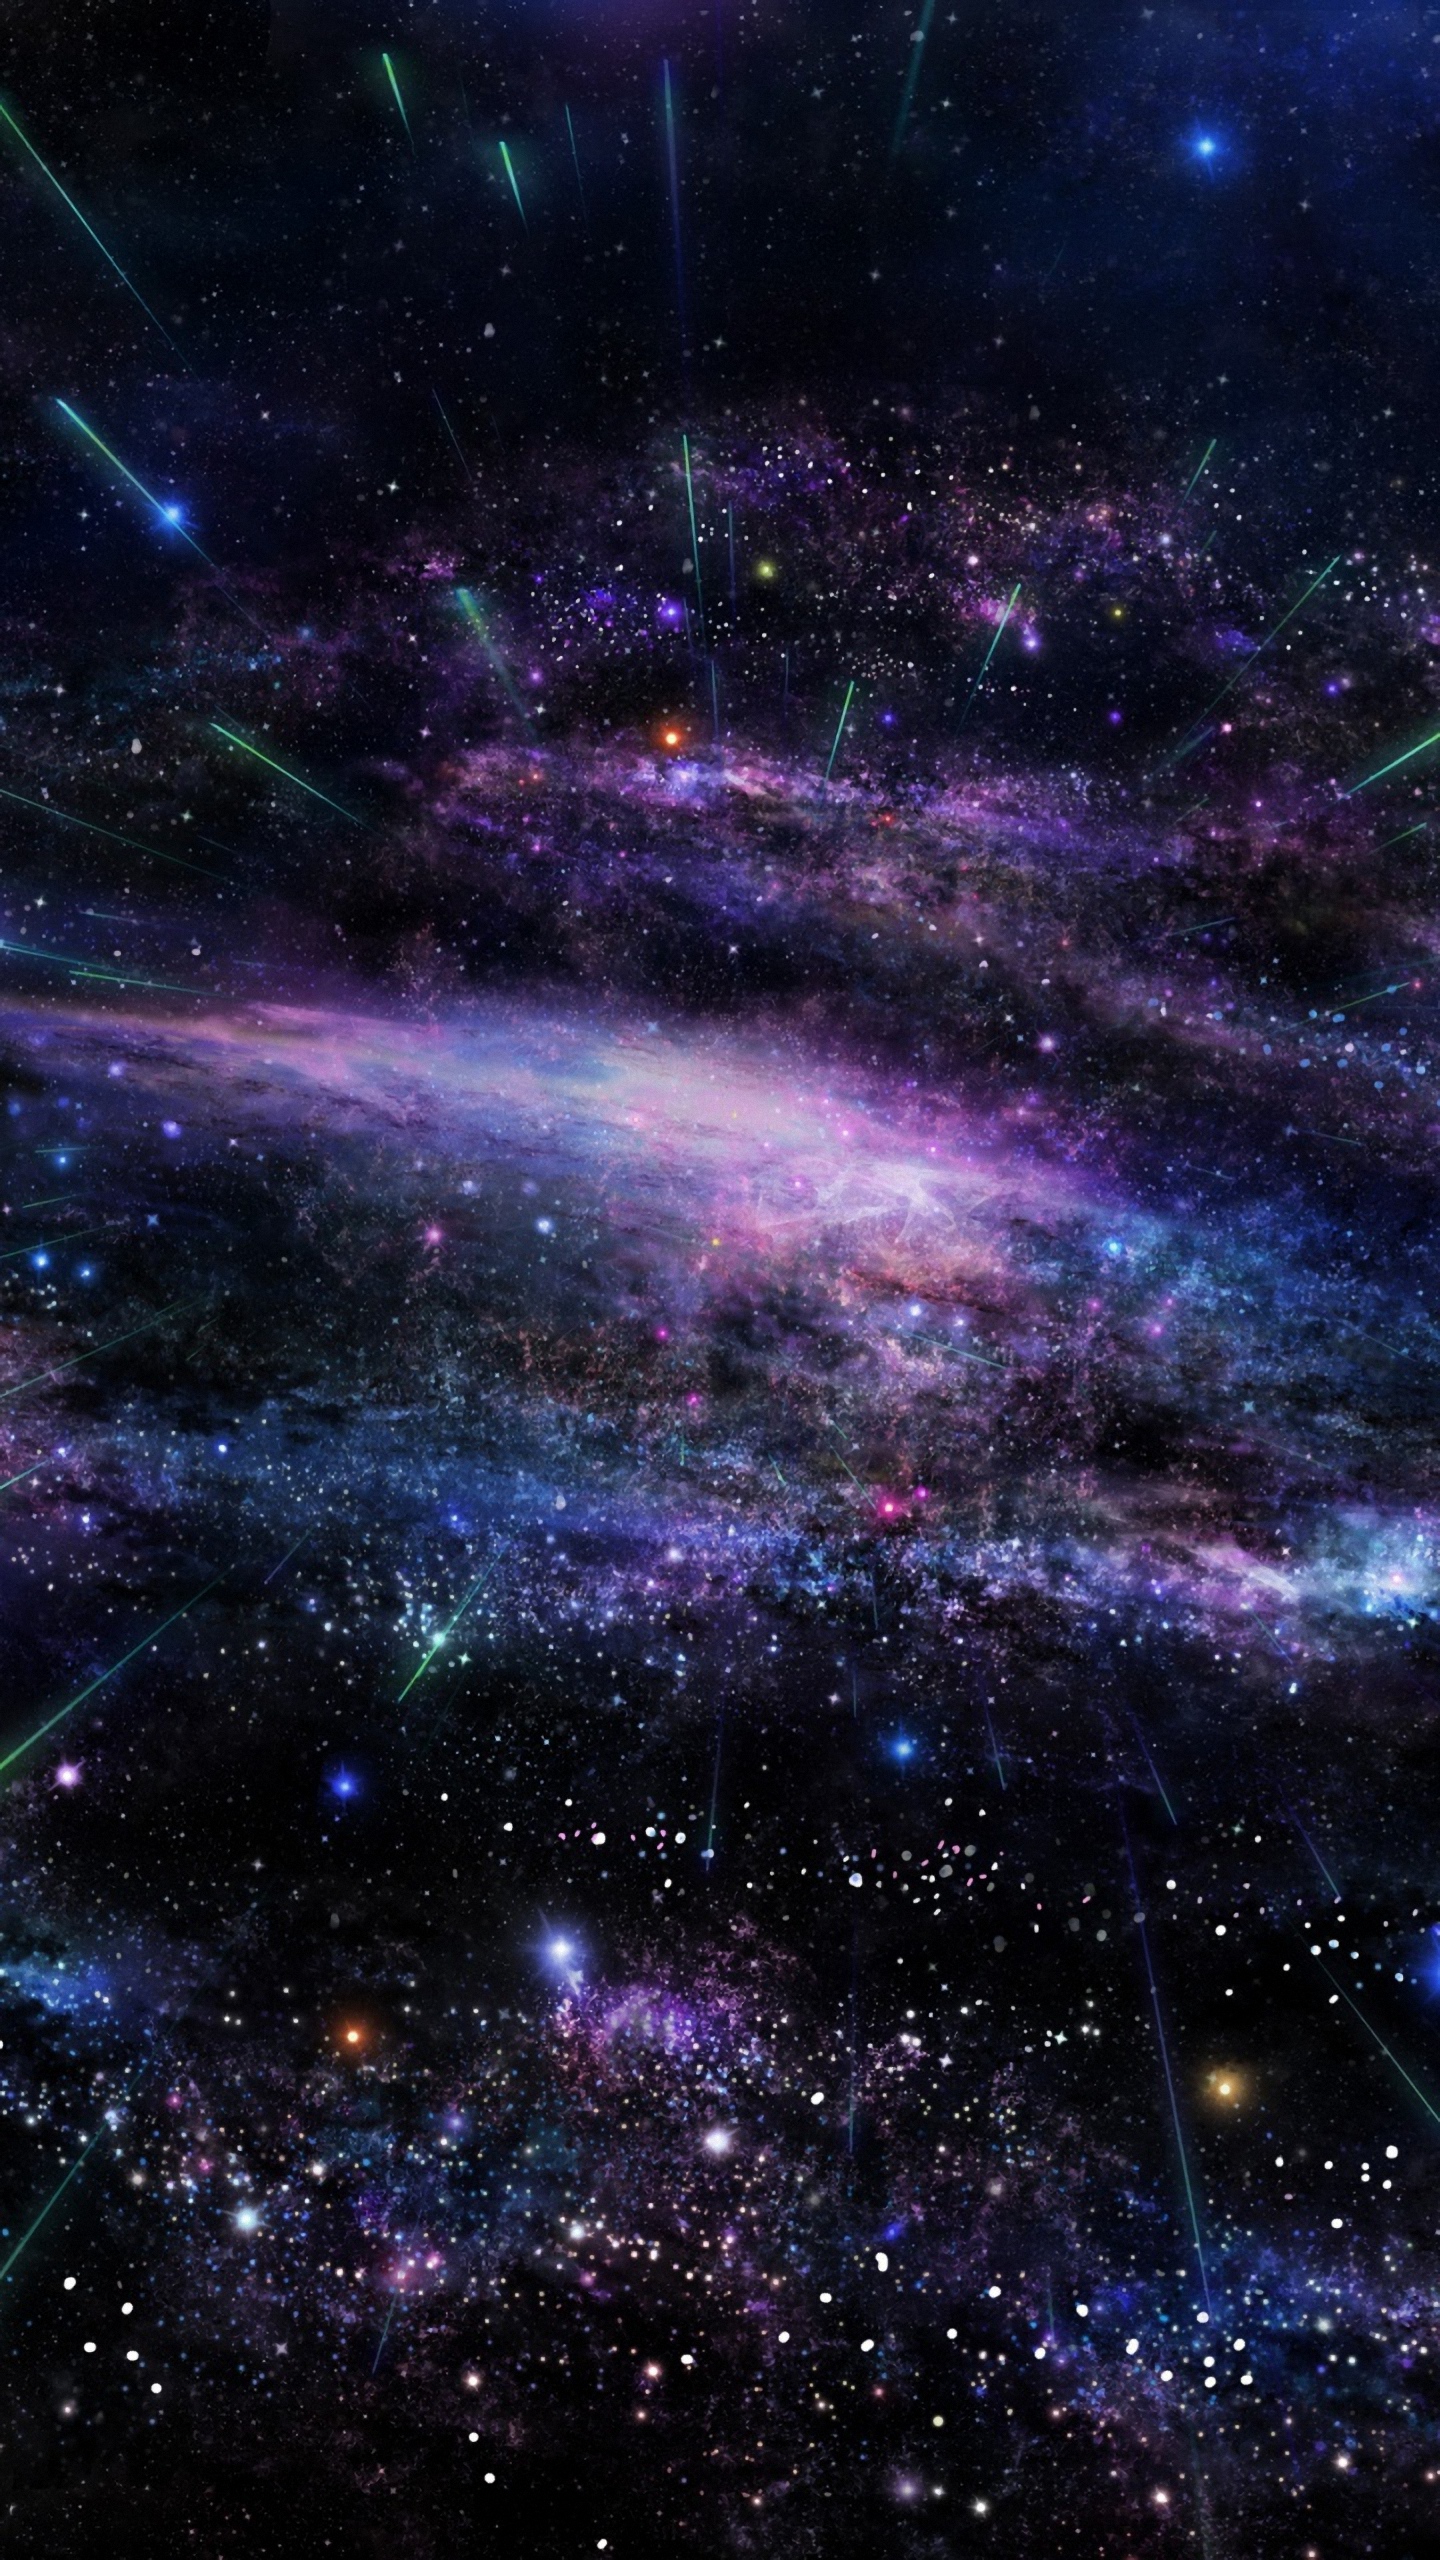 hd wallpapers 1440 x 2560,outer space,purple,sky,astronomical object,violet